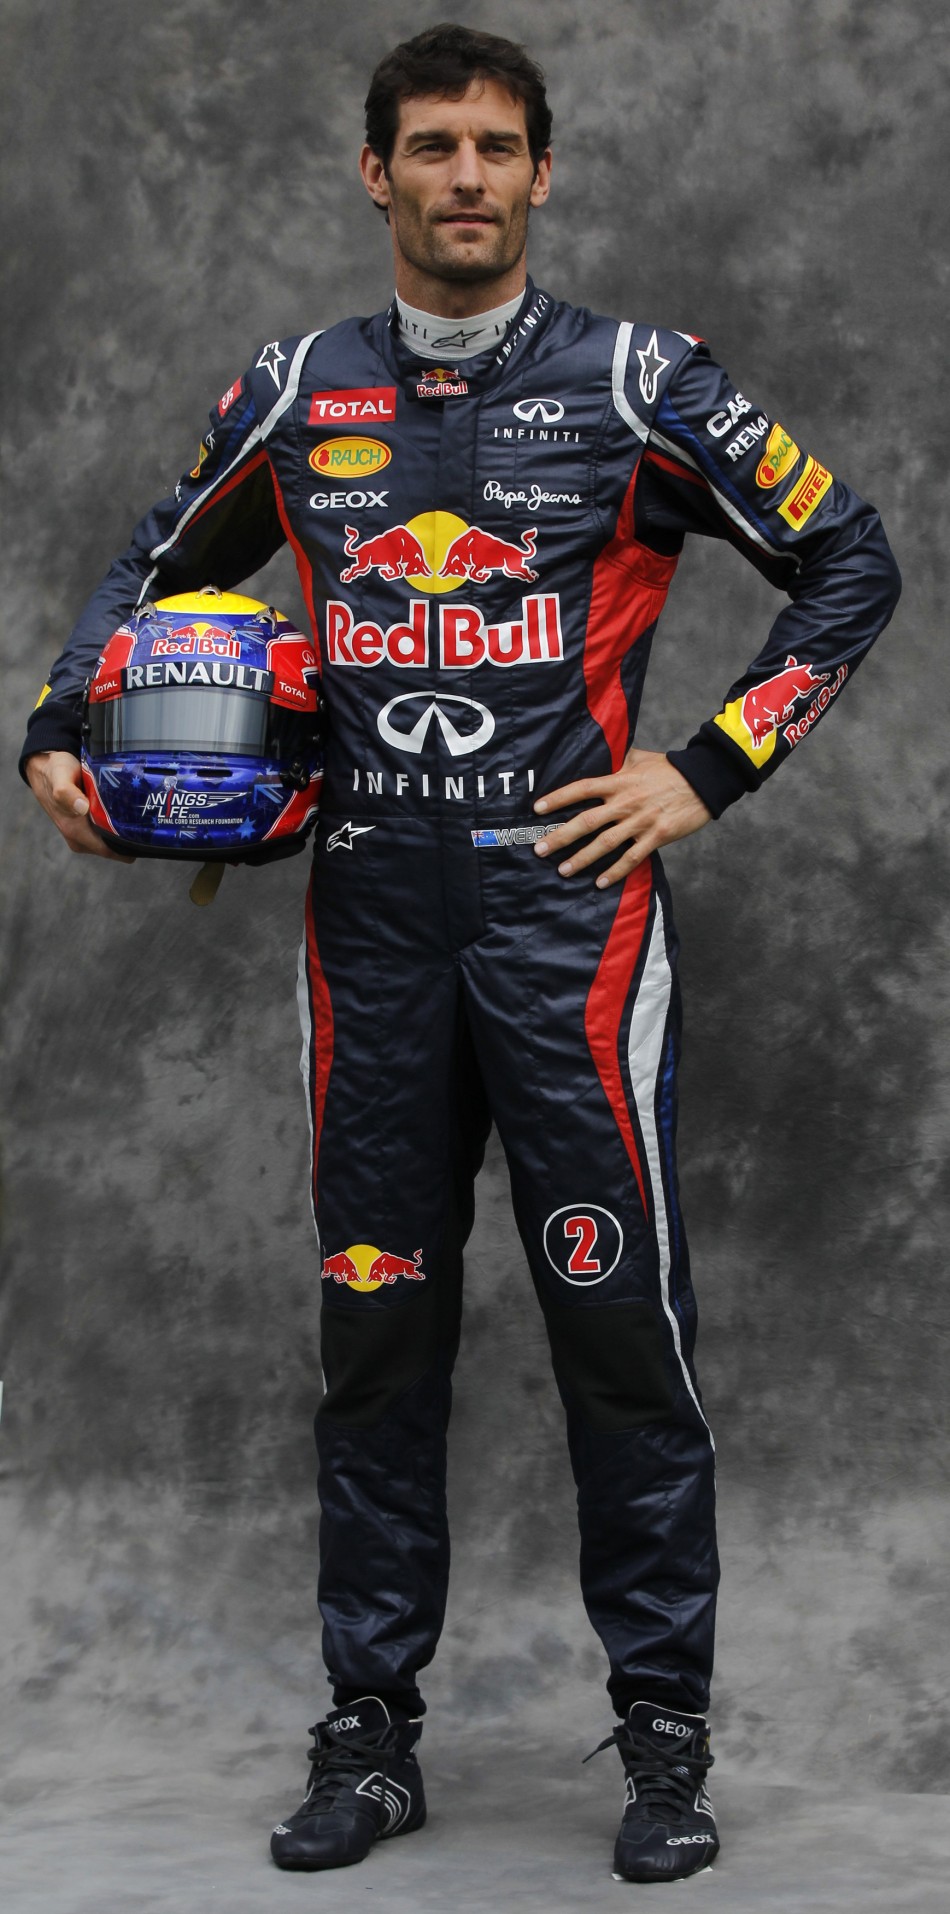 Red Bull Formula One driver Webber poses prior to the Australian F1 Grand Prix at the Albert Park circuit in Melbourne